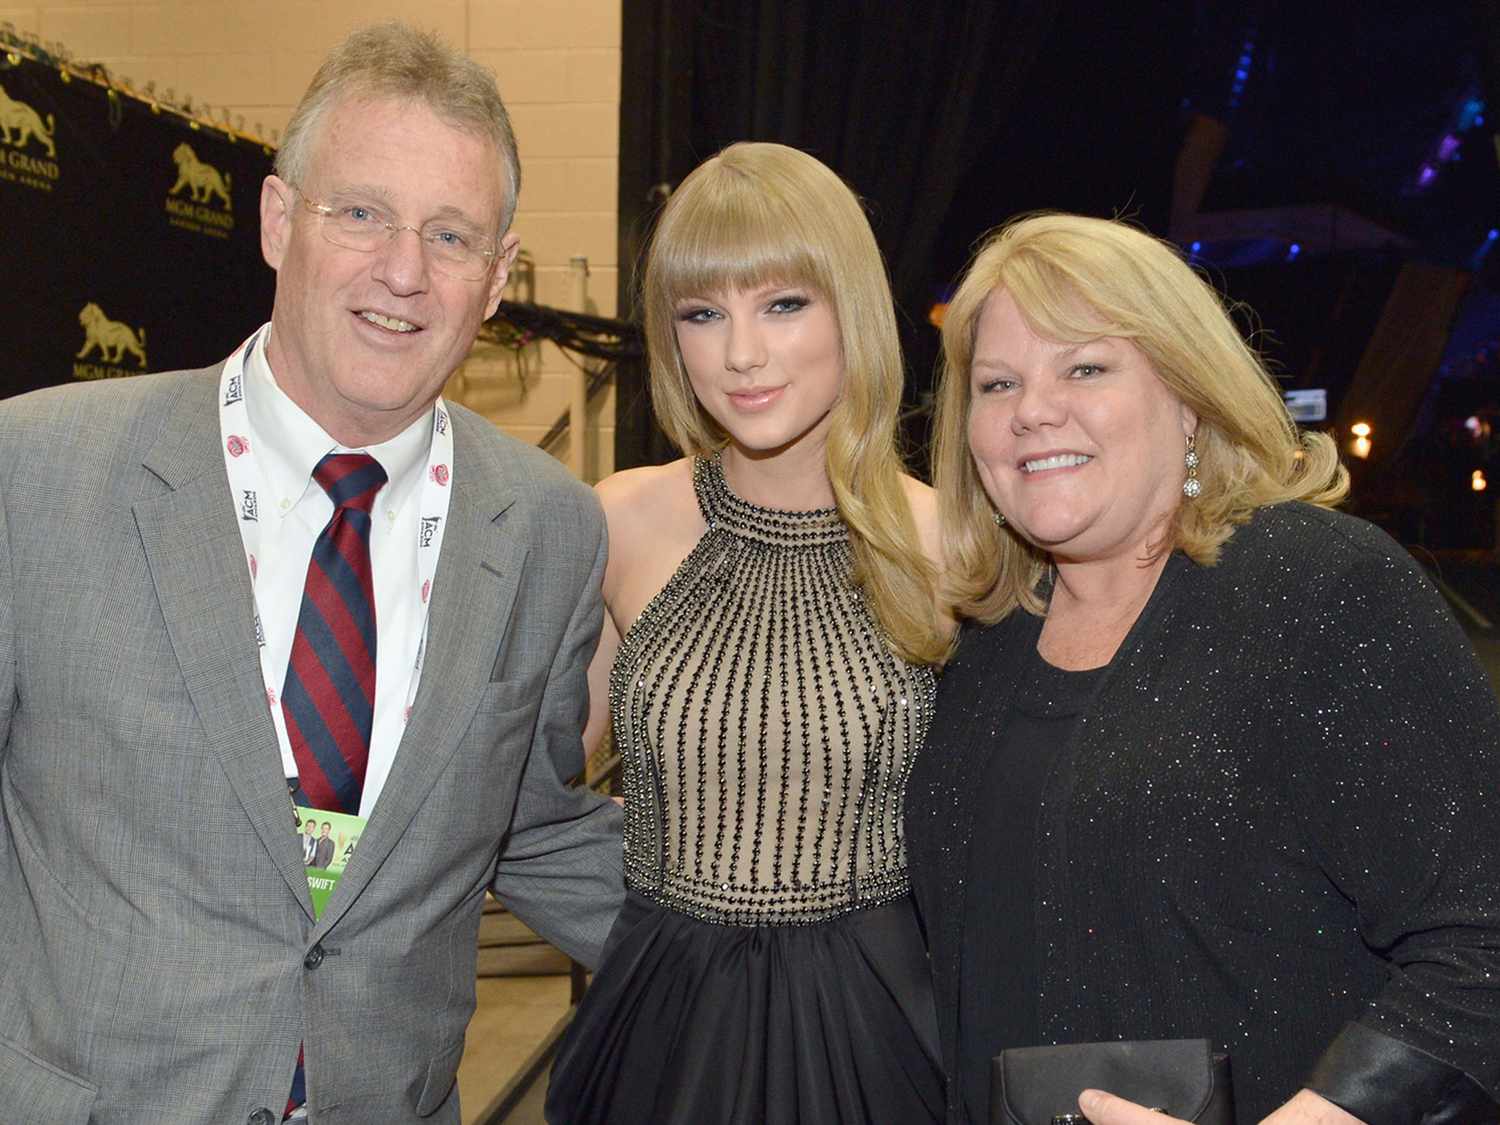 "Happy Birthday, Mom! You're the reason my life is so sweet. May your day be filled with love, laughter, and all the sweet things that make you happy." Taylor Swift celebrates her mom's 66th birthday with this heartfelt message.